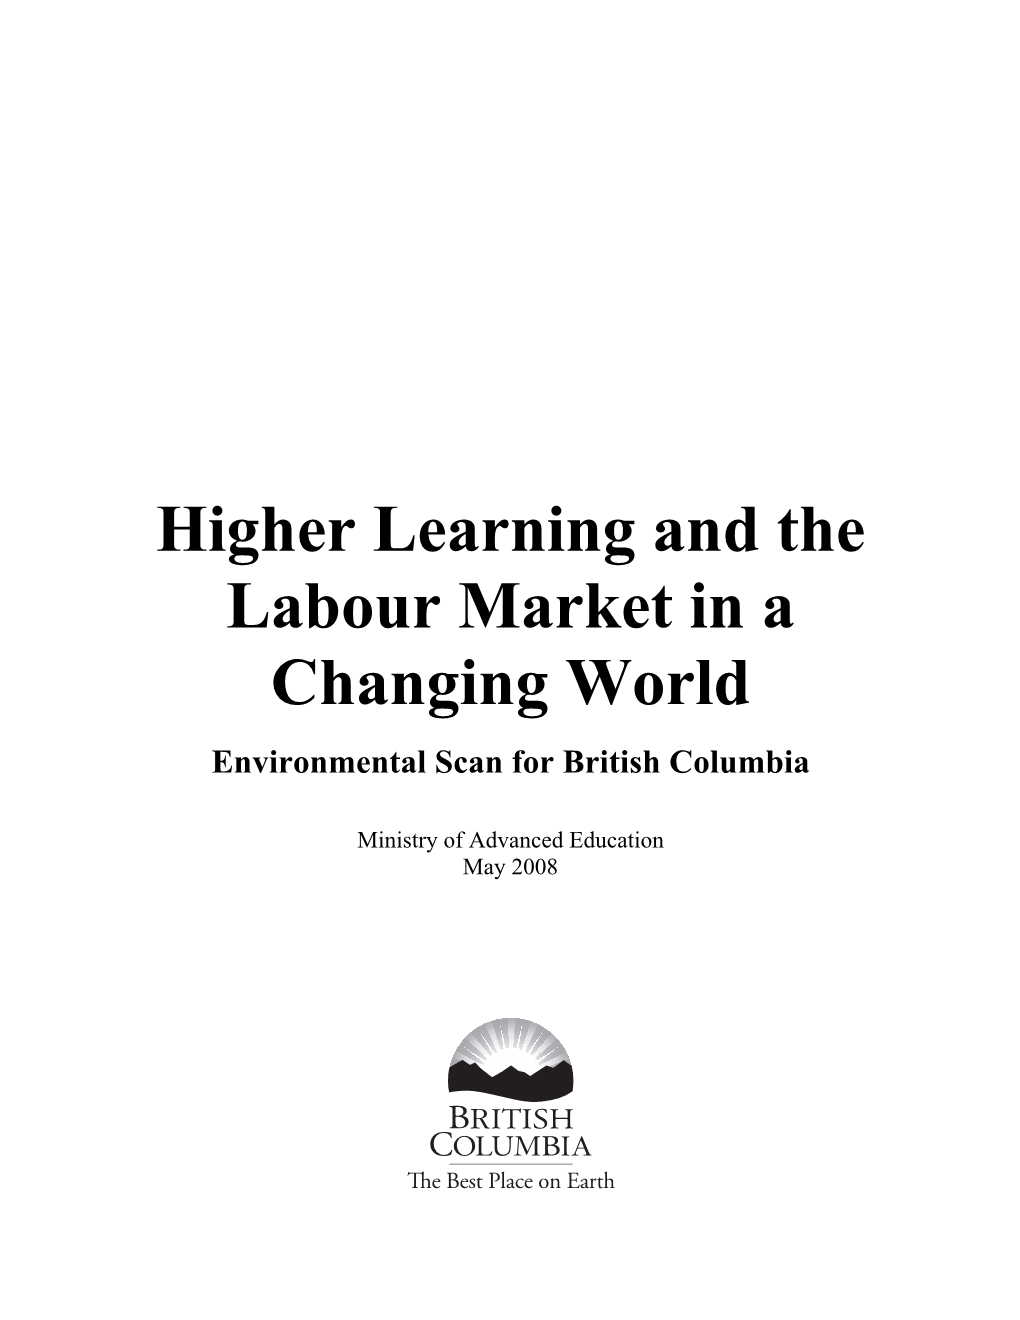 Higher Learning and the Labour Market in a Changing World